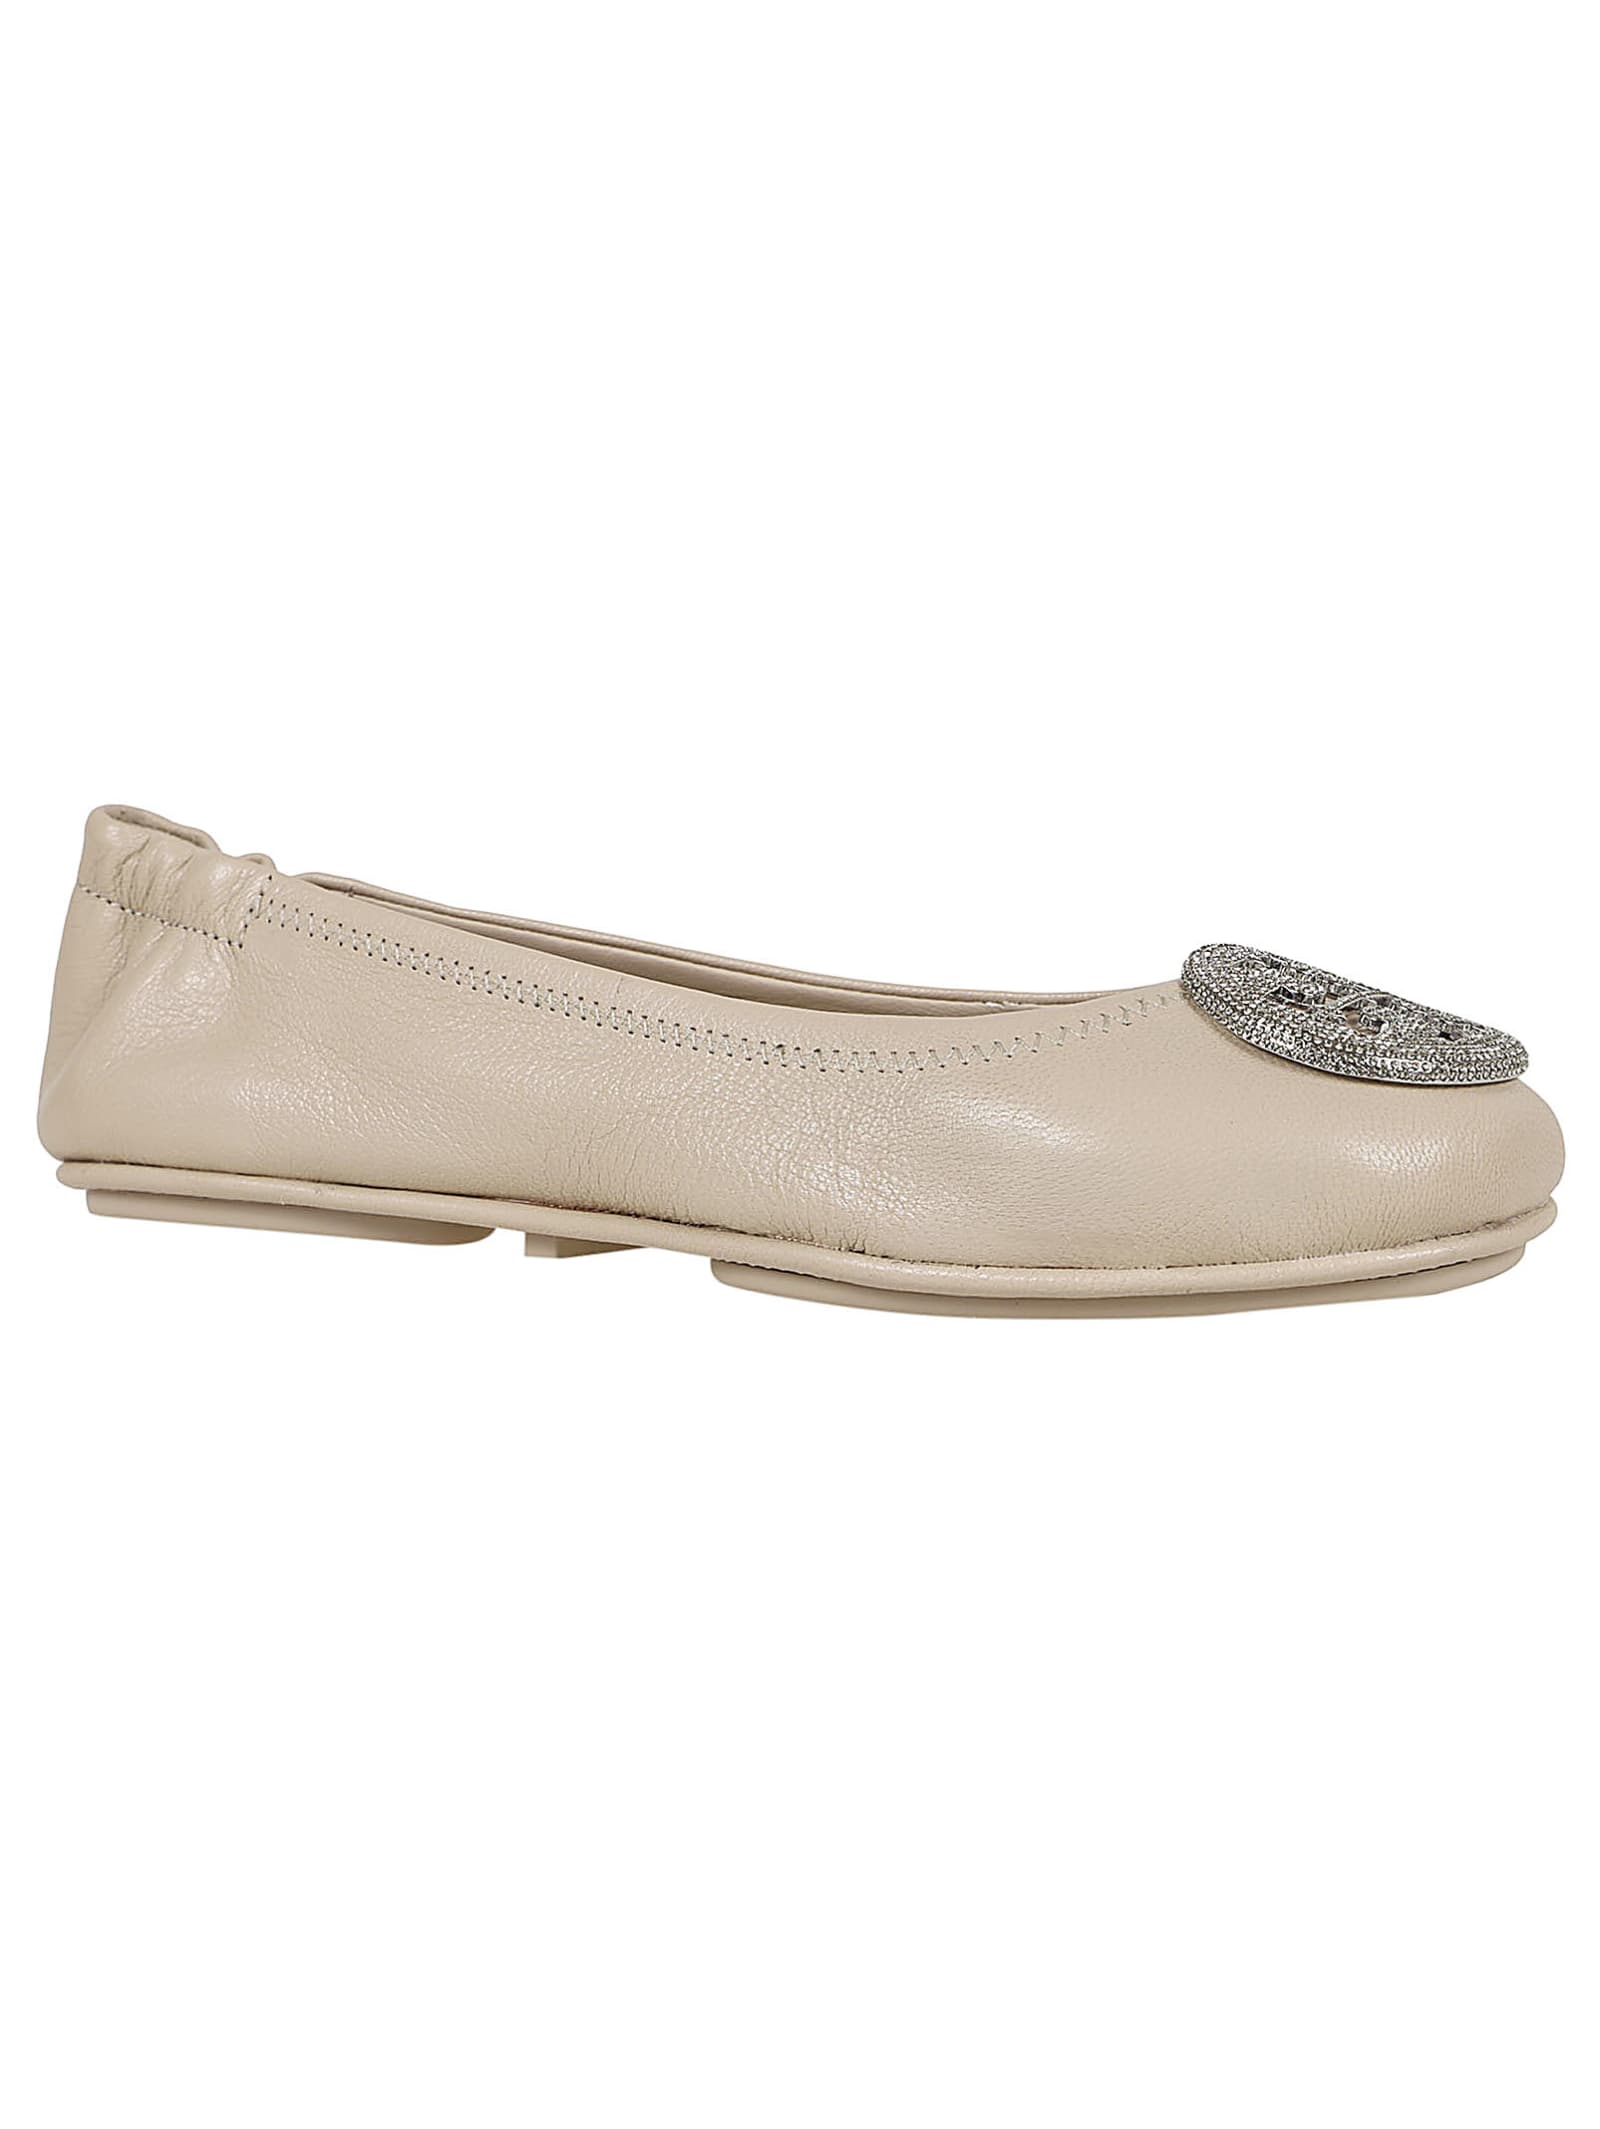 Shop Tory Burch Minnie Travel Ballet Pave In Stone Gray Silver